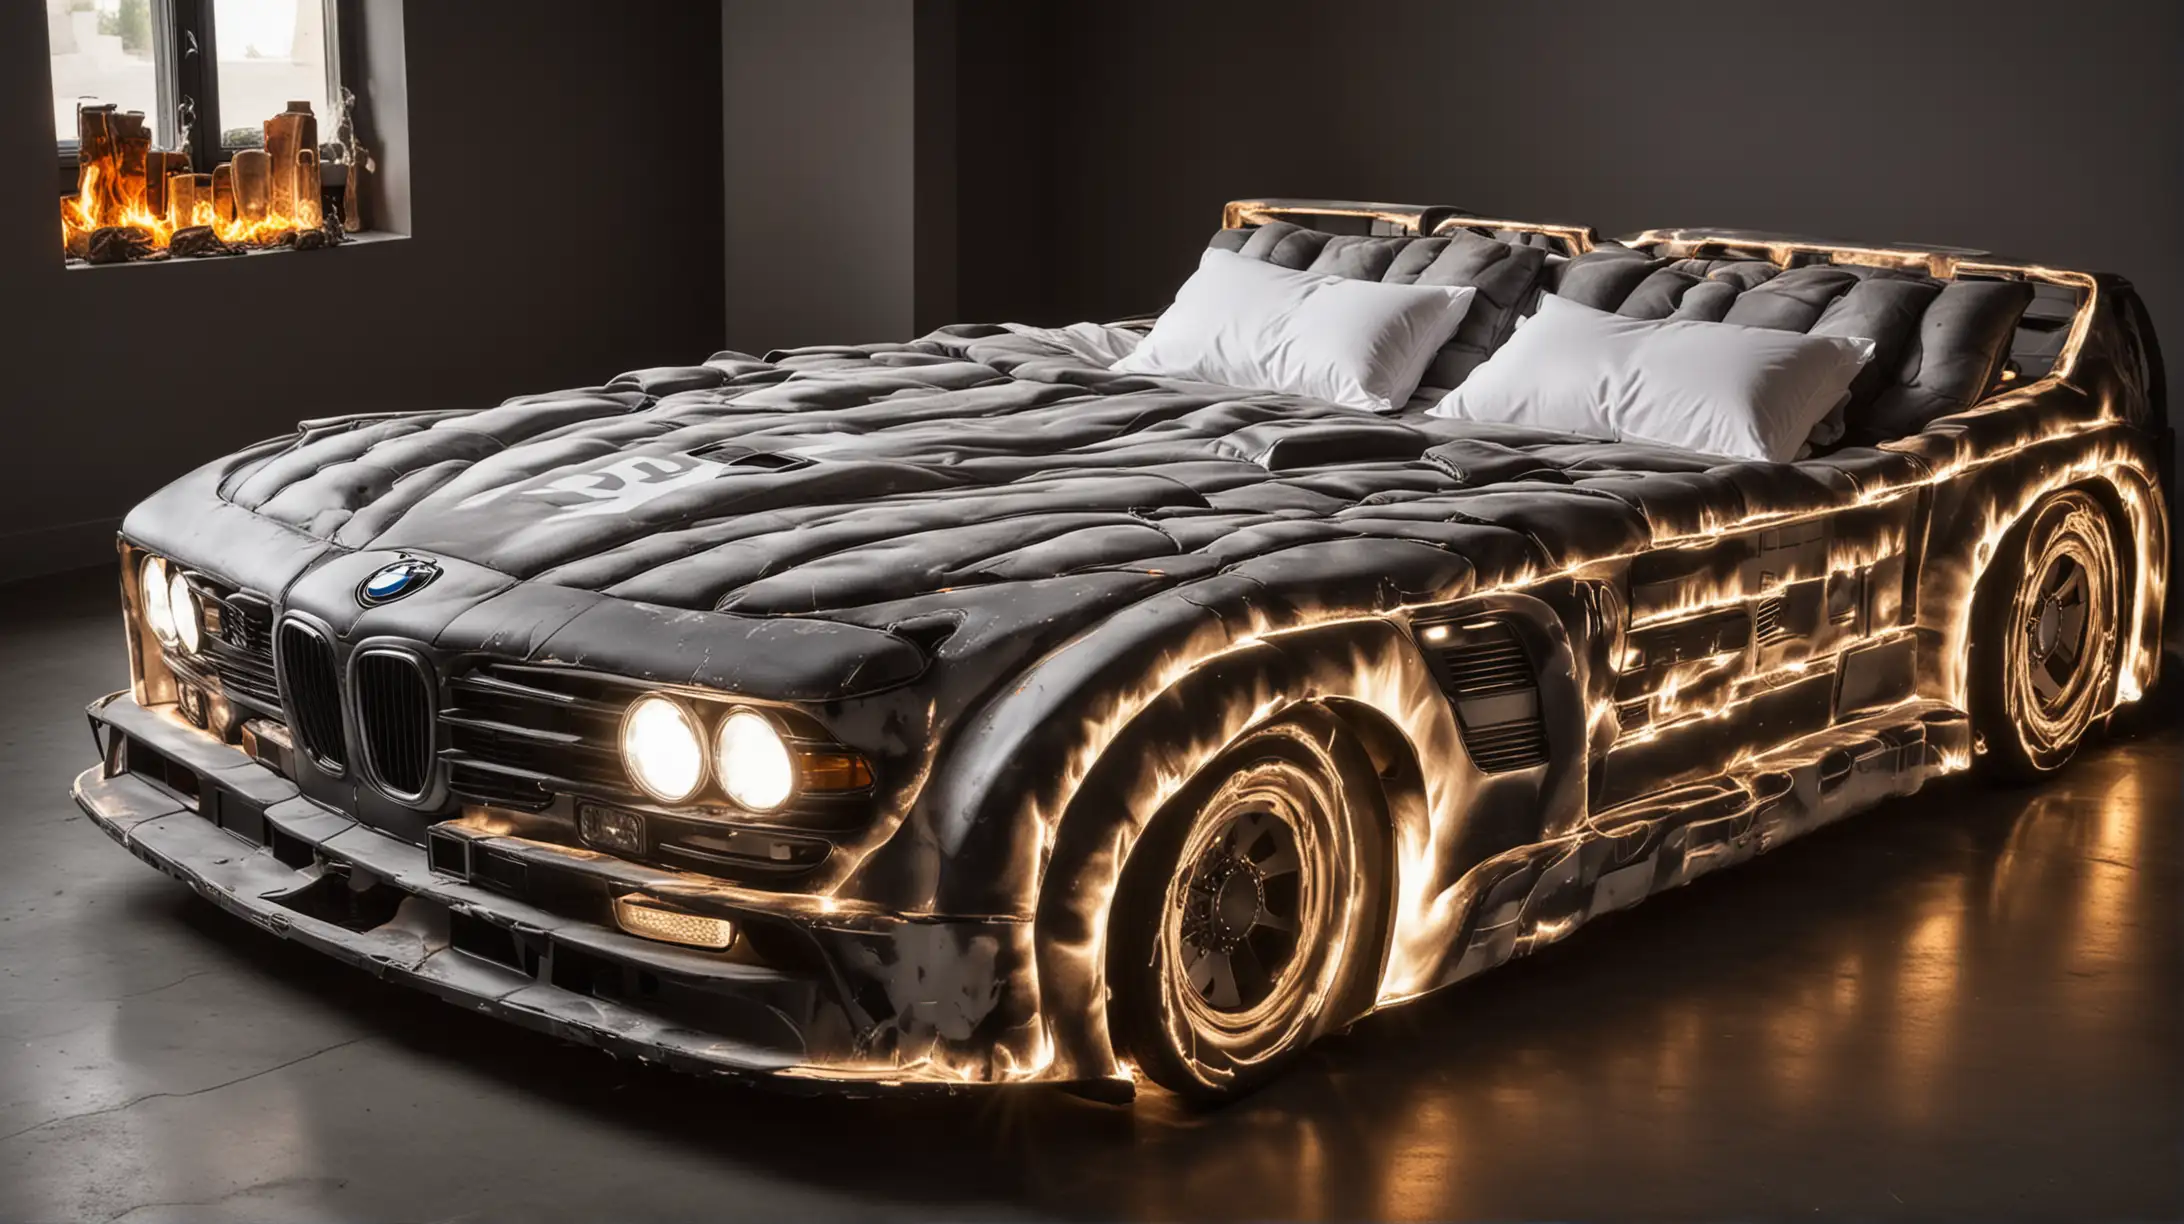 Double bed in the shape of a BMW car with headlights on and fire graphics